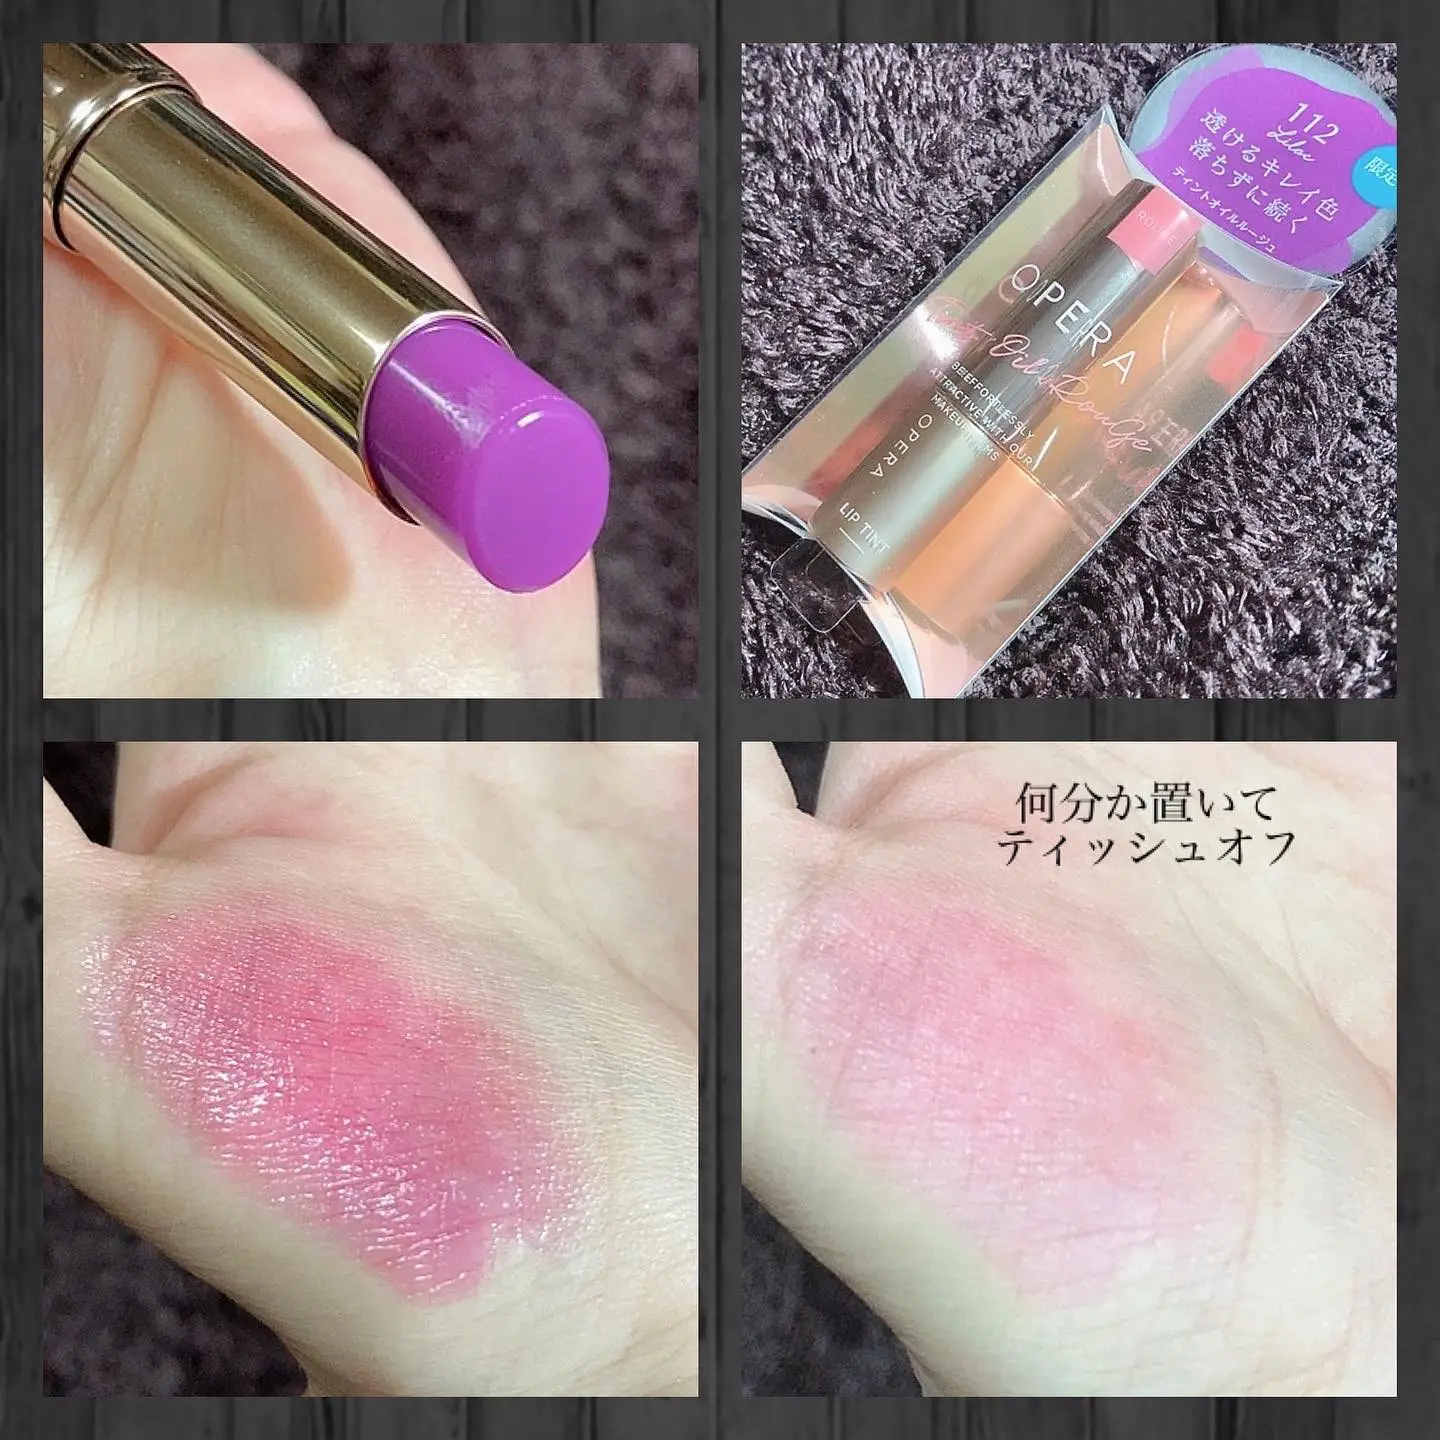 Limited color of OPERA💜💜 | Gallery posted by yukiko15 | Lemon8